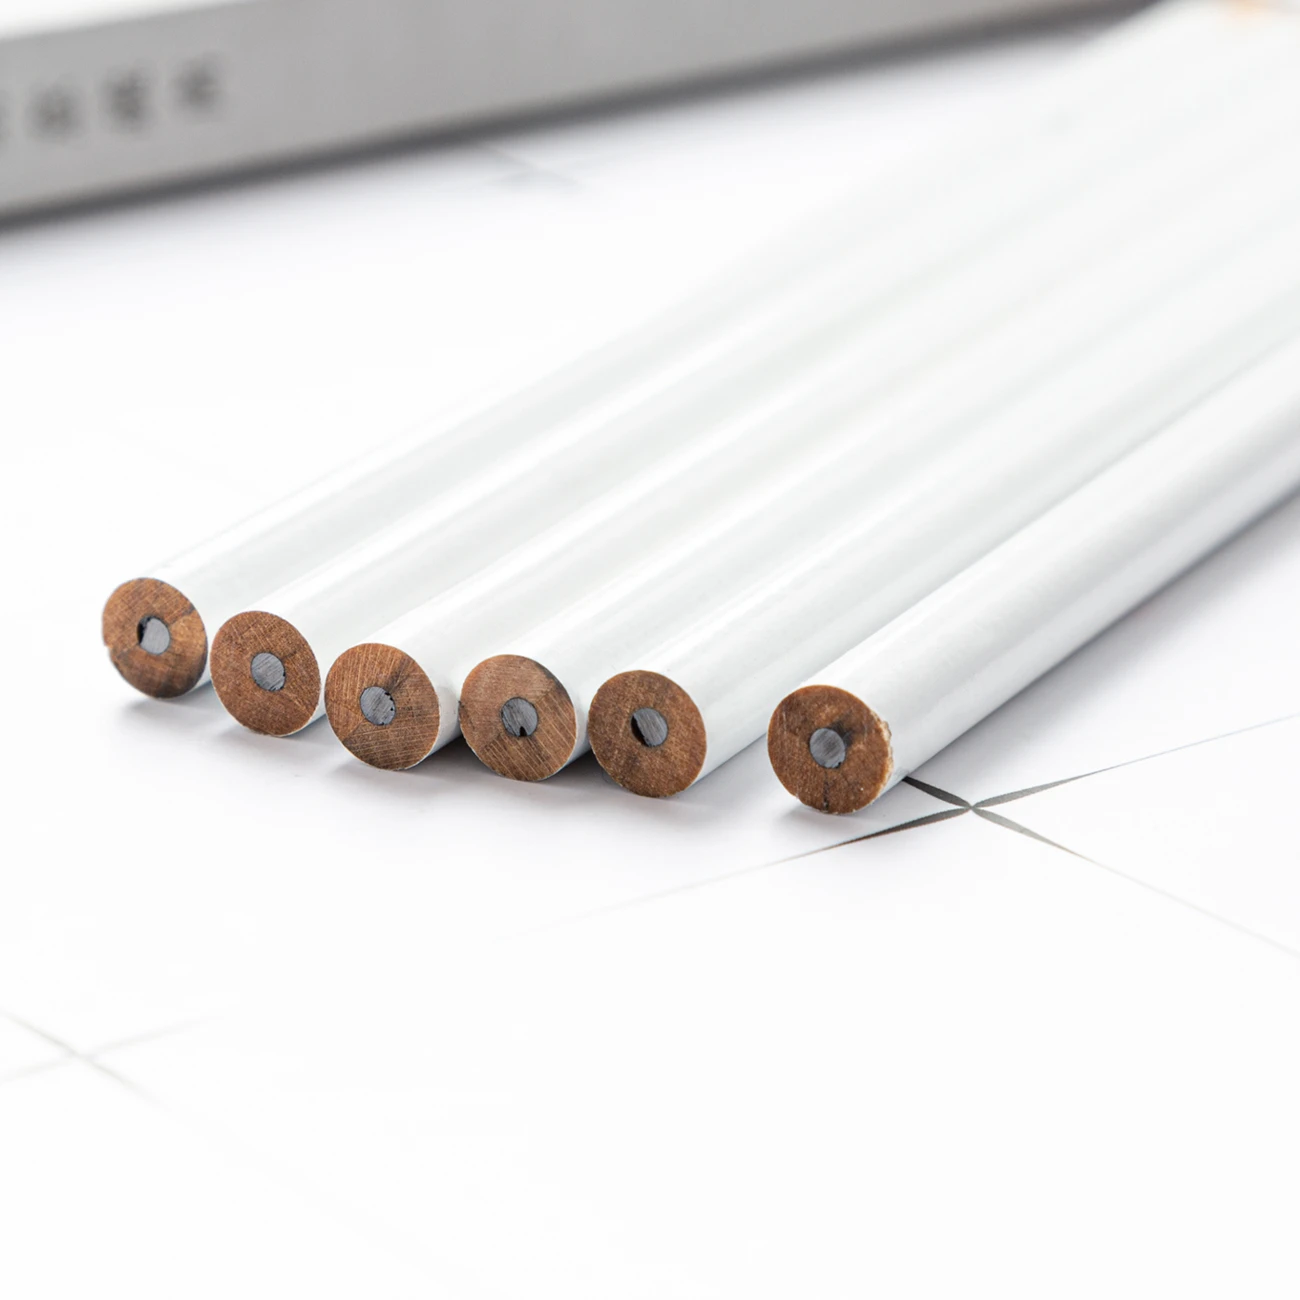 Hot Sell White Coated Natural Wooden HB Pencil